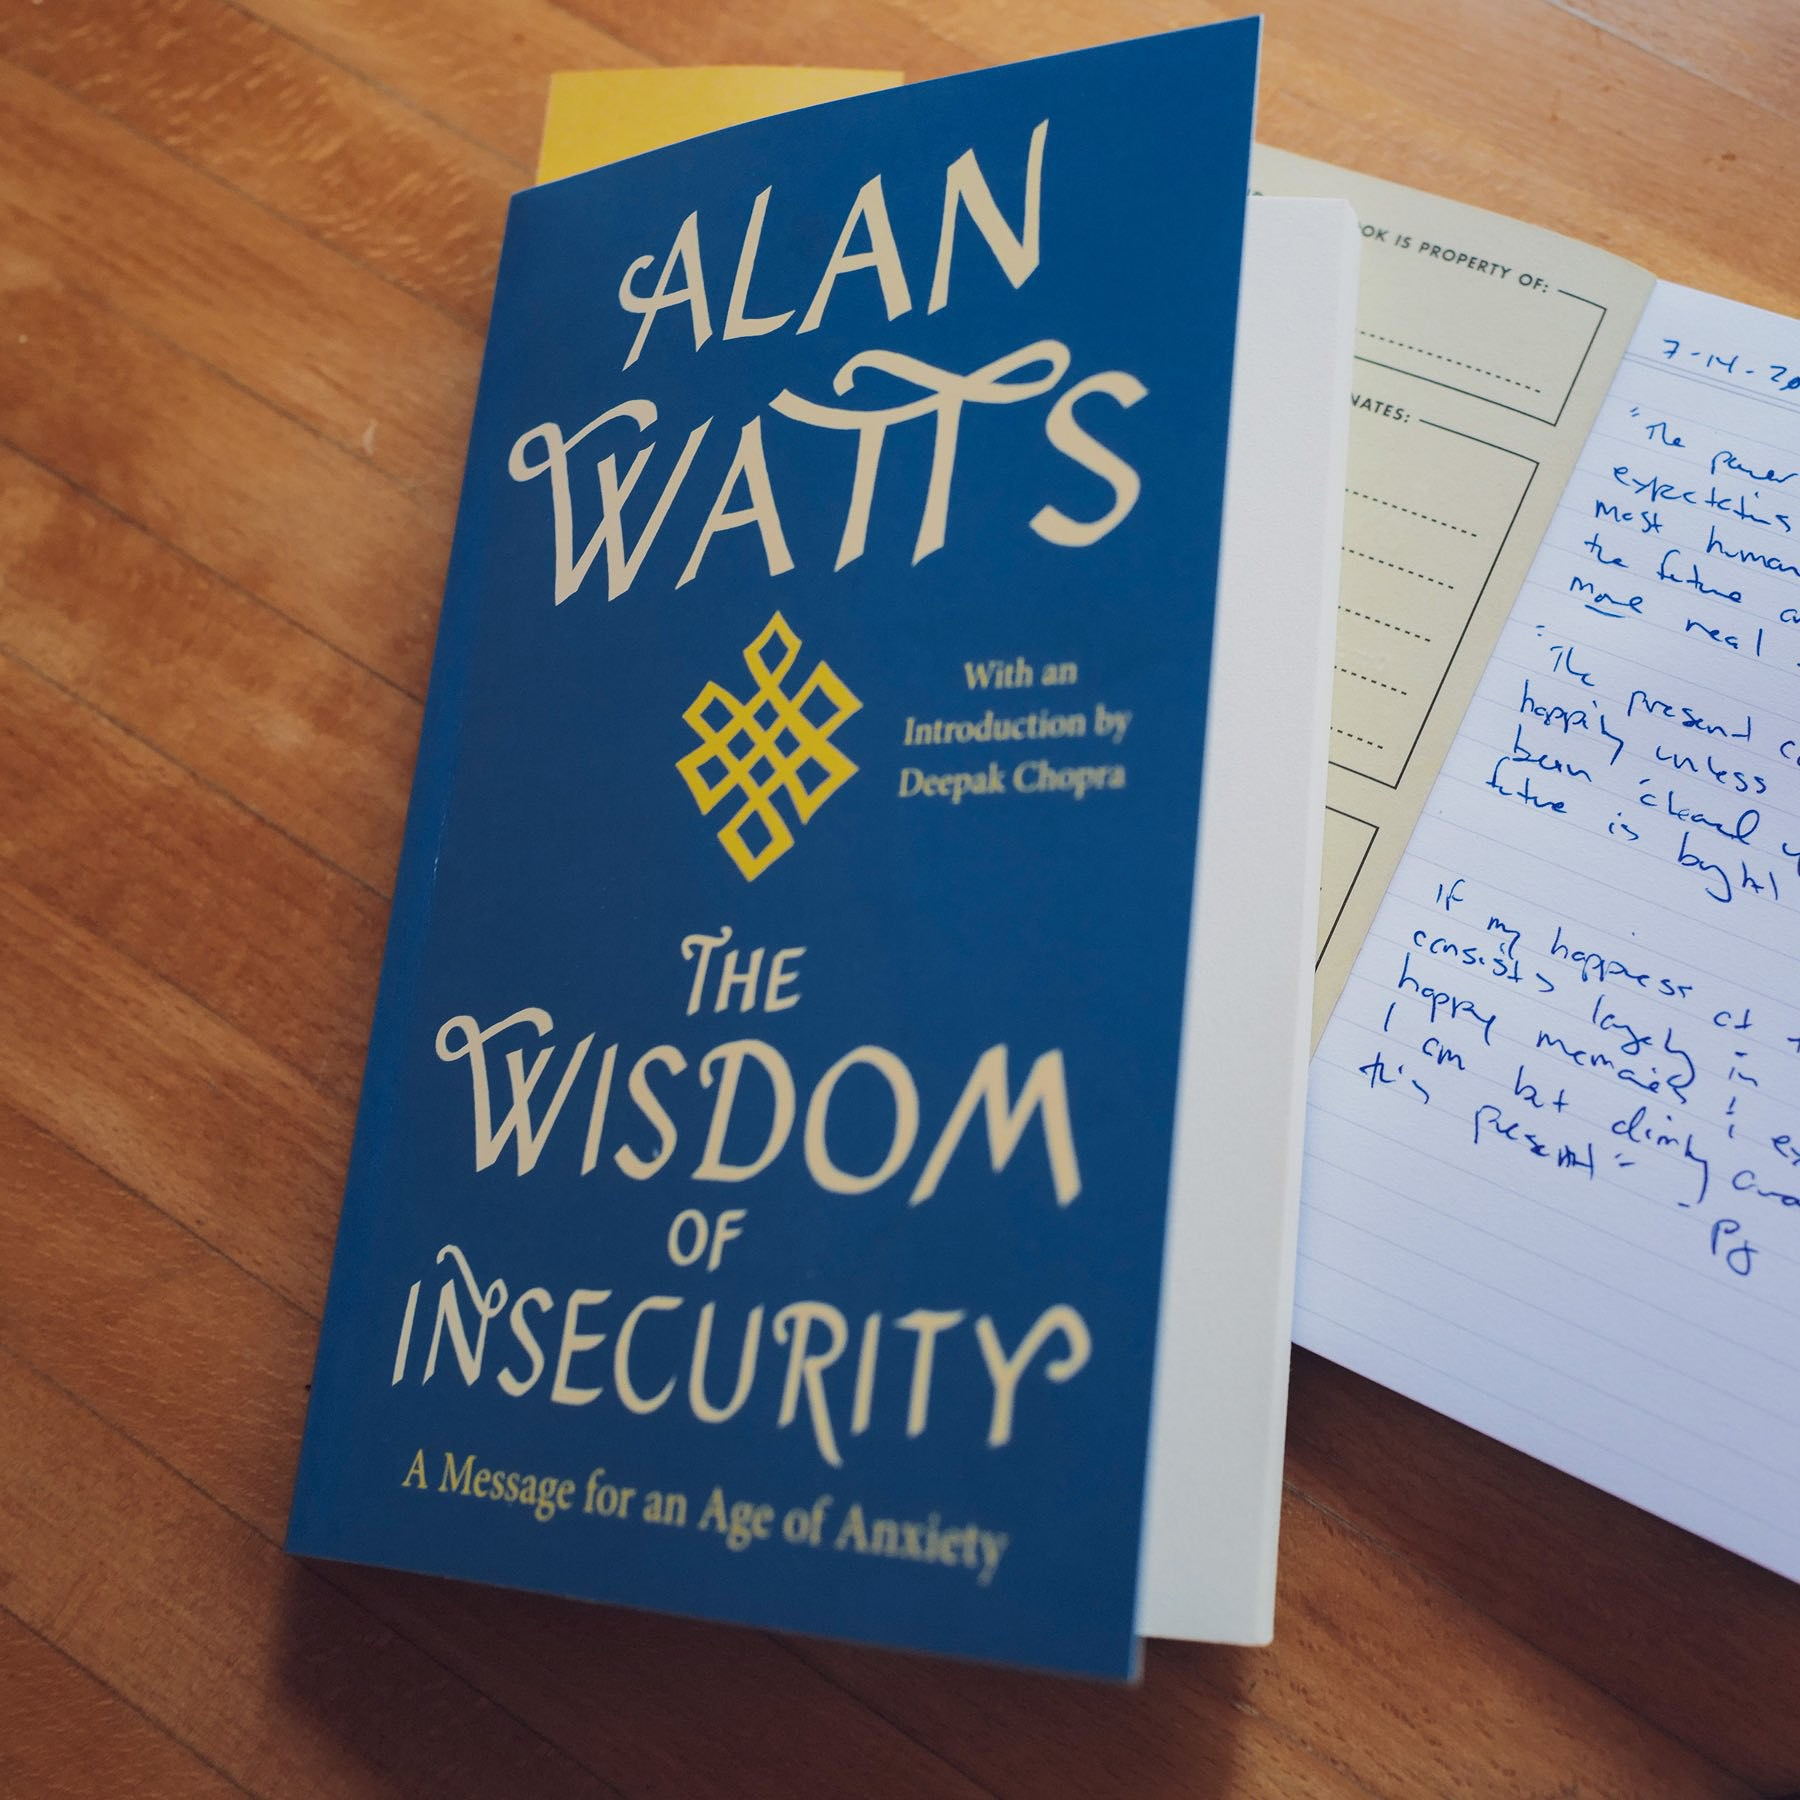 Alan Watts' book "The Wisdom of Insecurity" on a wooden table with an open notebook next to it.